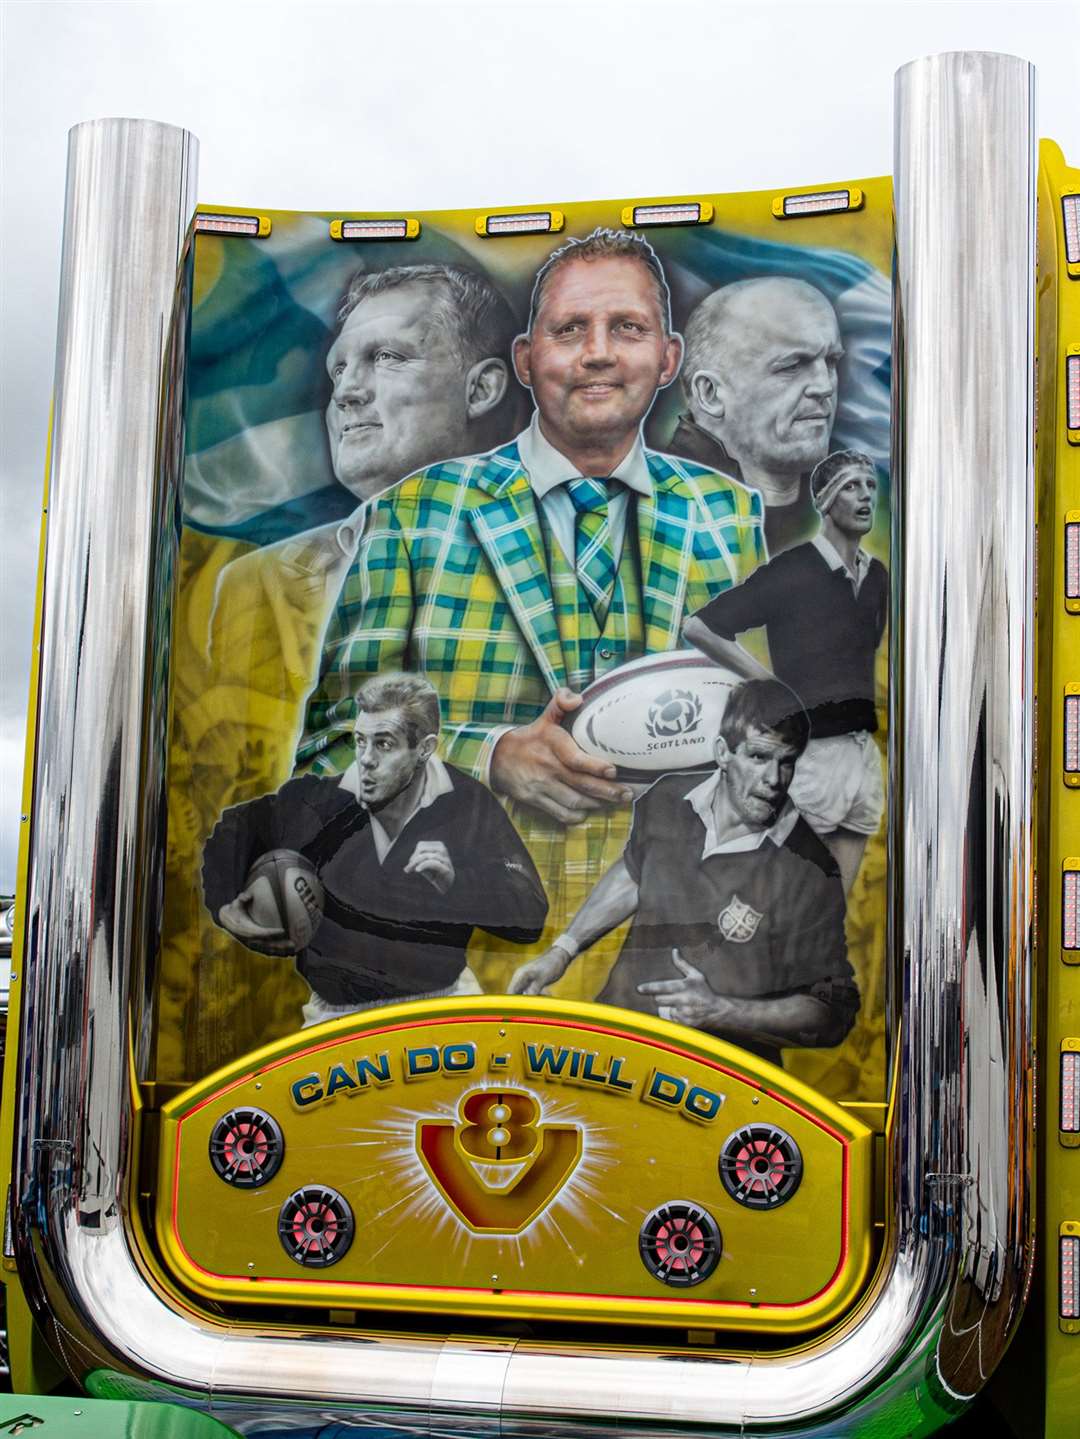 A stunning mural on the rear of the R19 WHM Doddie Weir truck. Photo: Niall Harkiss